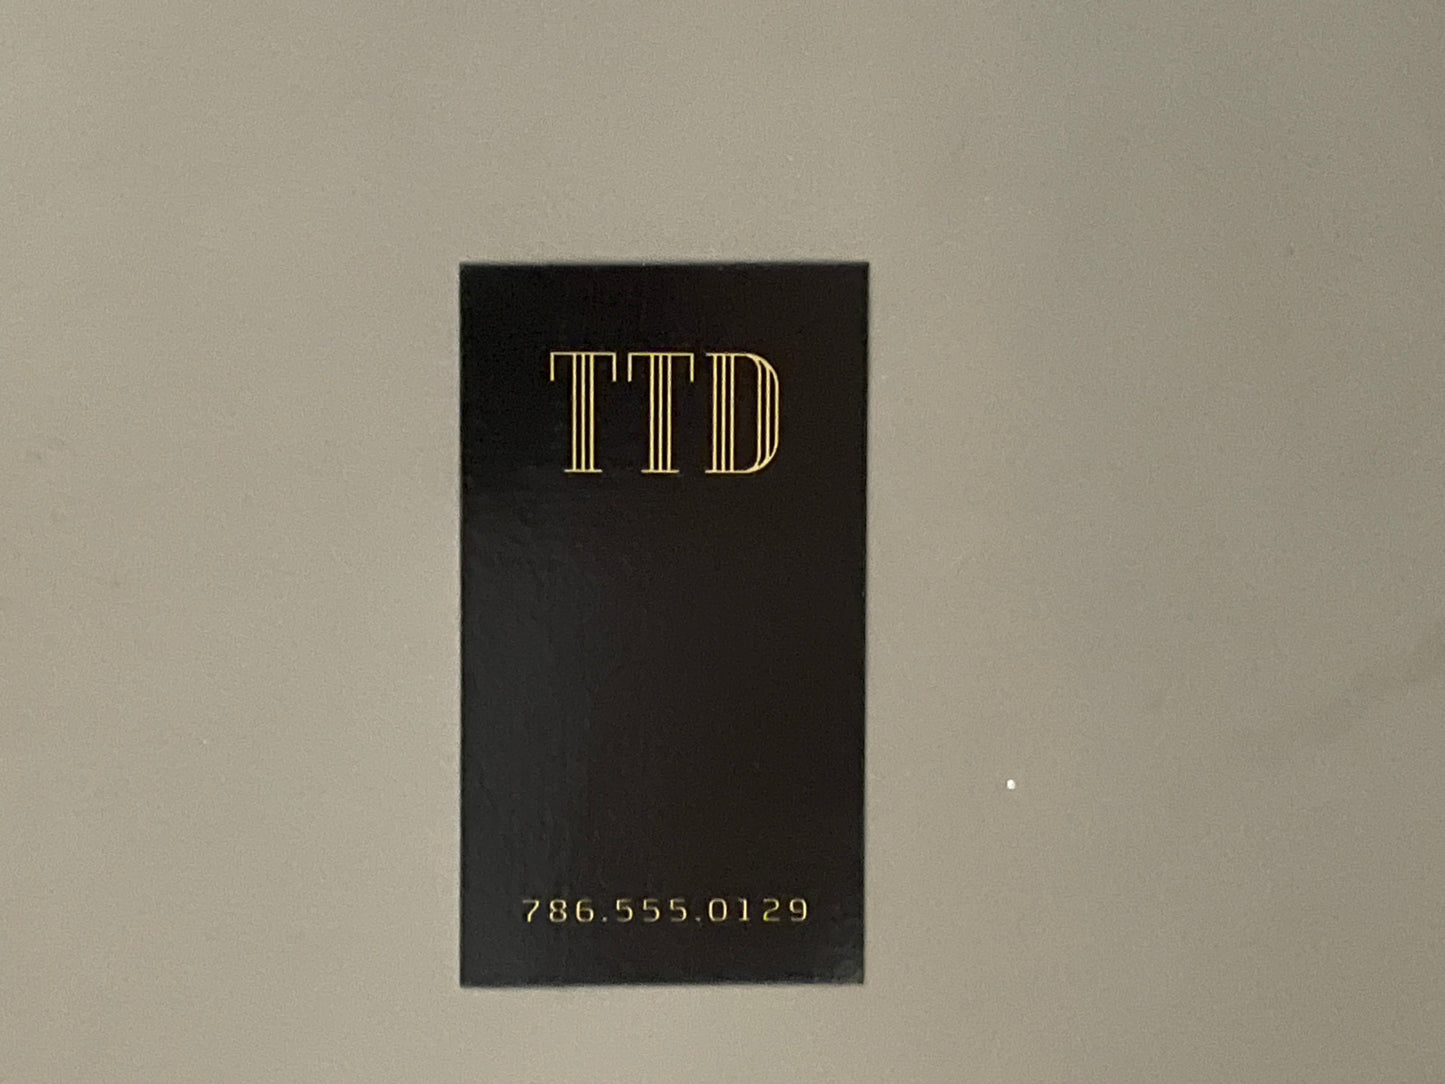 BALLERS: TTD's Business Card Gold